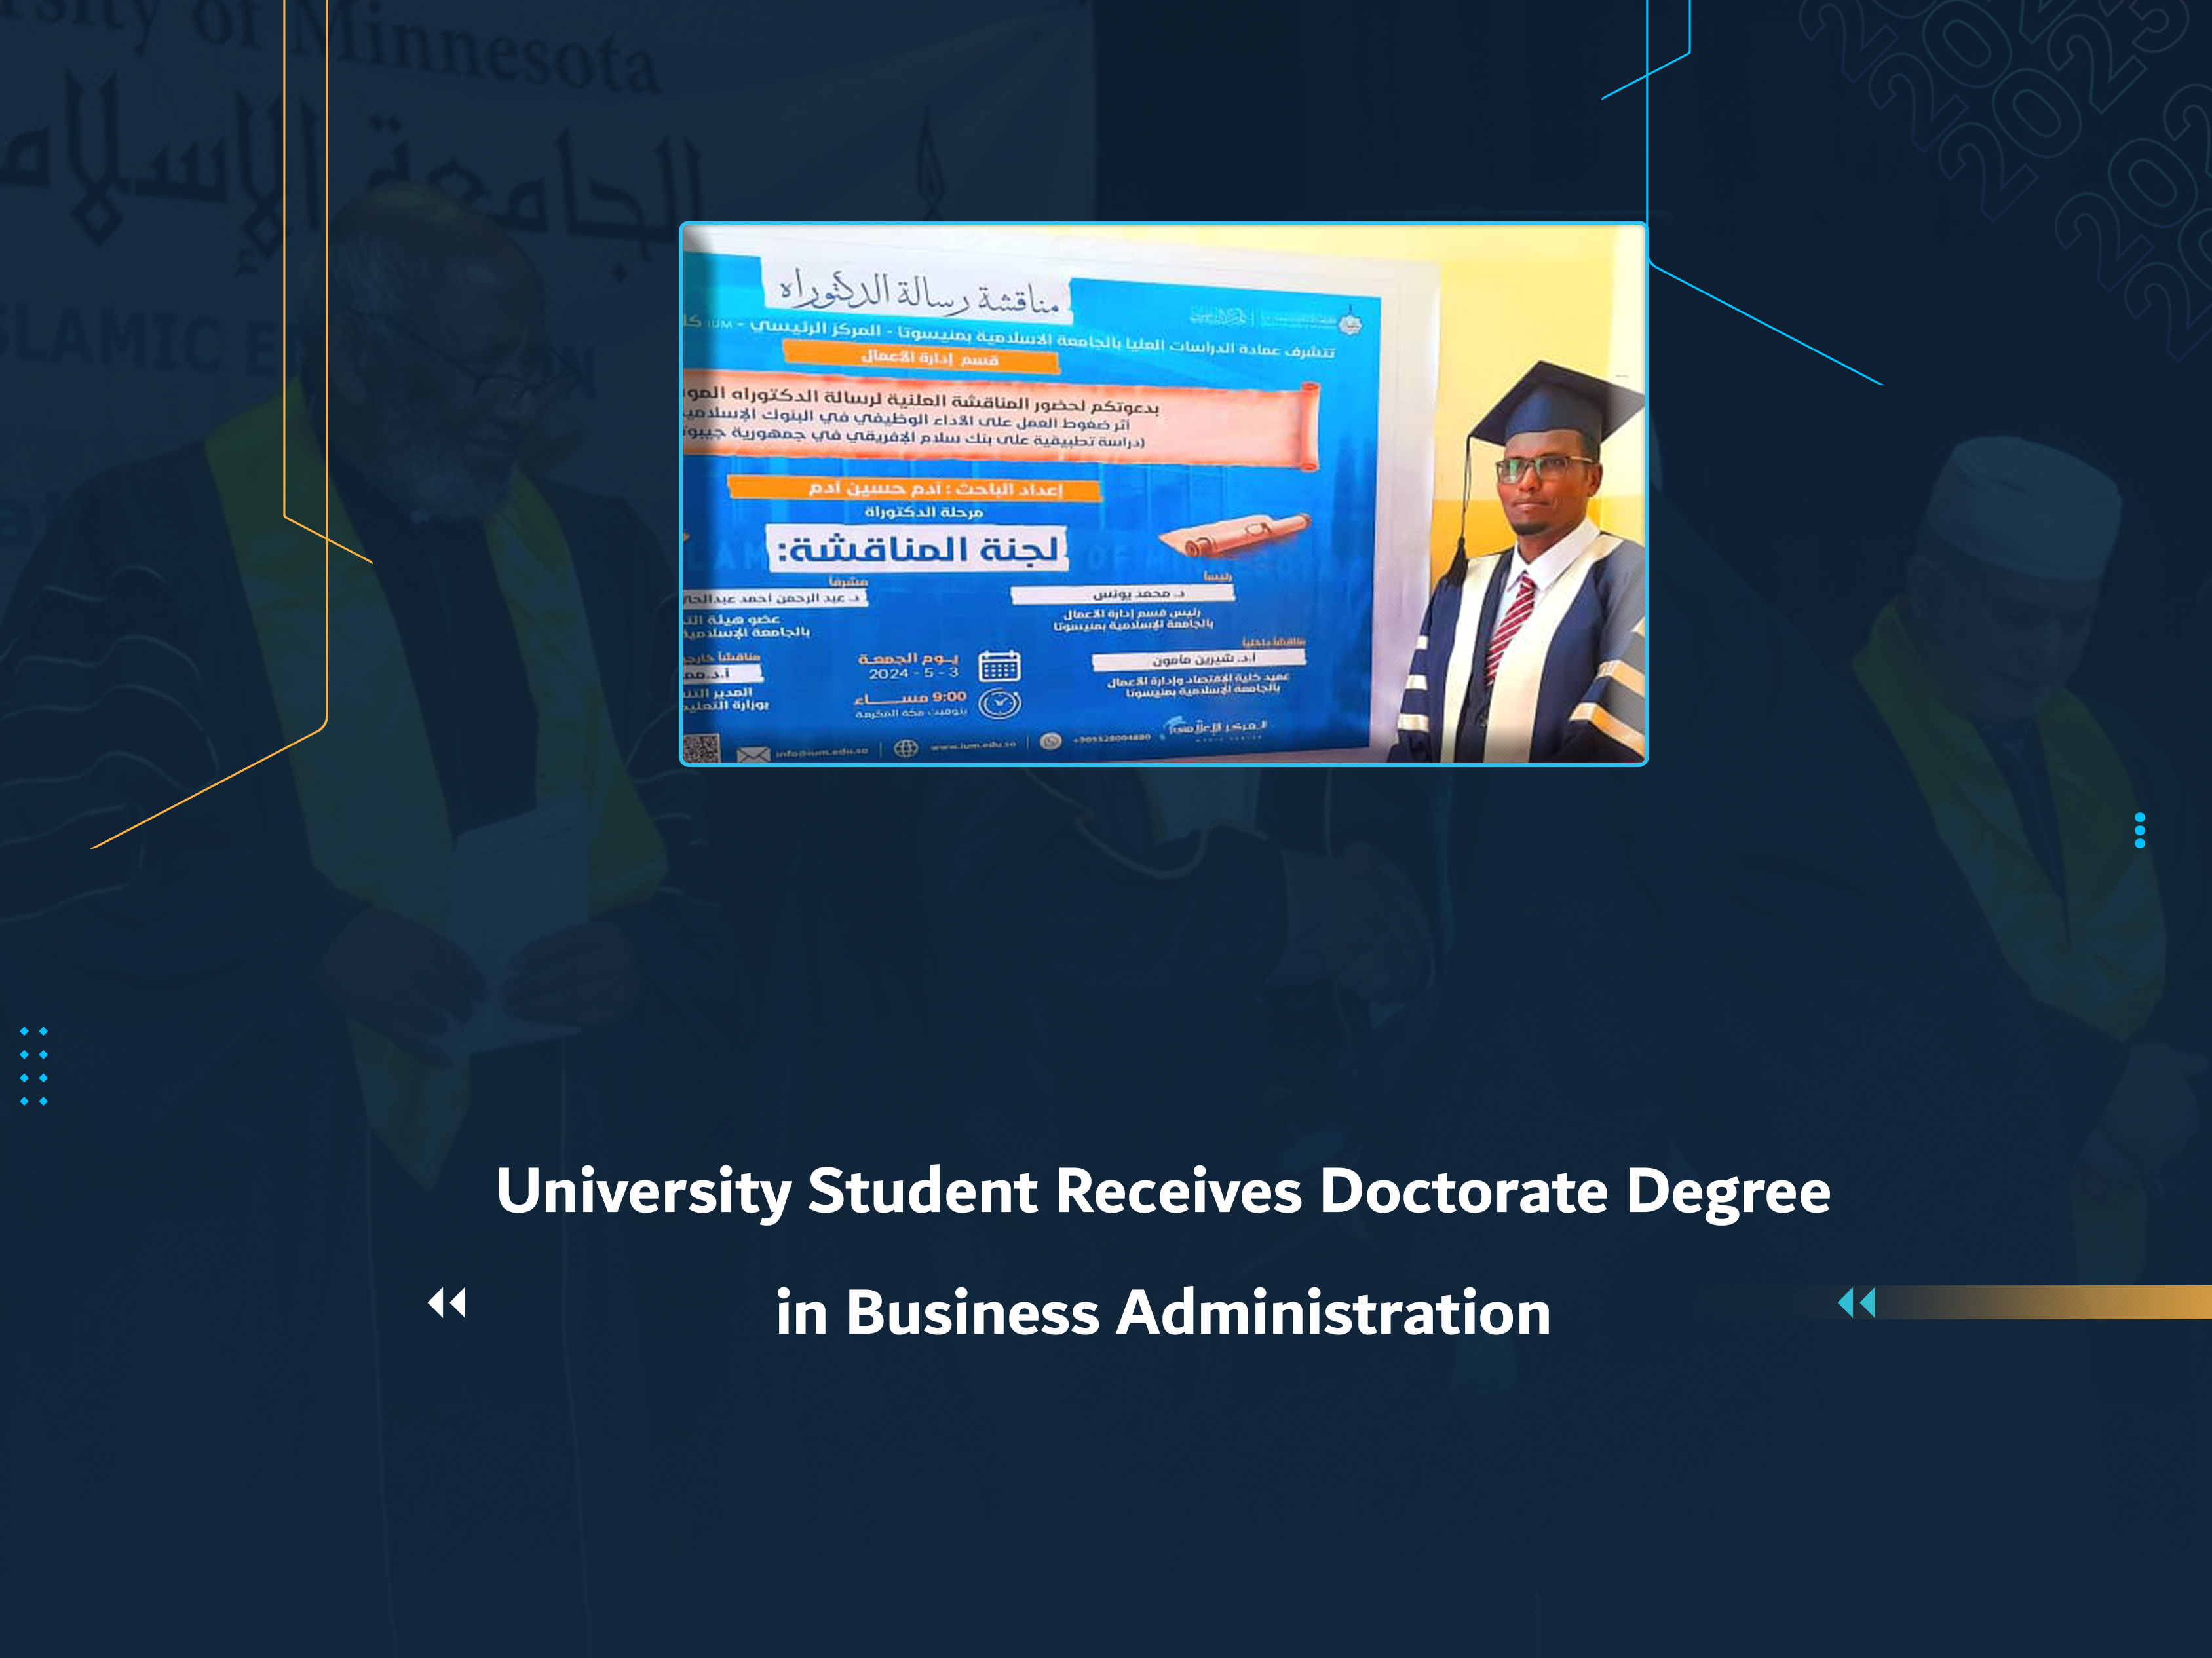 University Student Receives Doctorate Degree in Business Administration